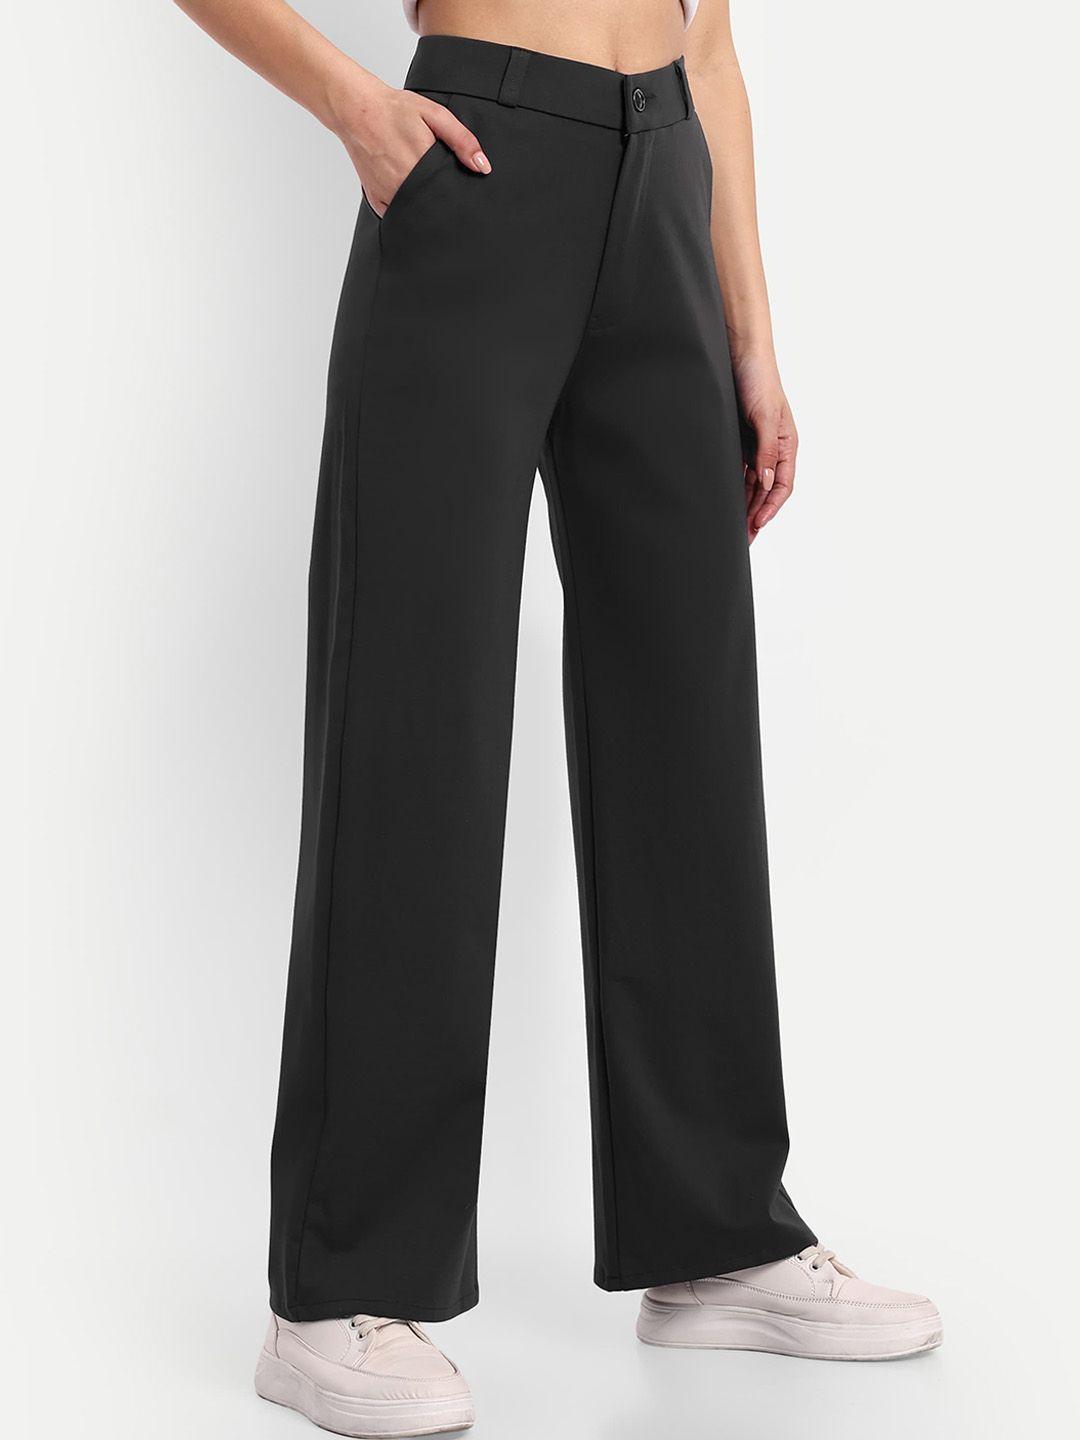 next-one-women-smart-loose-fit-high-rise-easy-wash-parallel-trousers